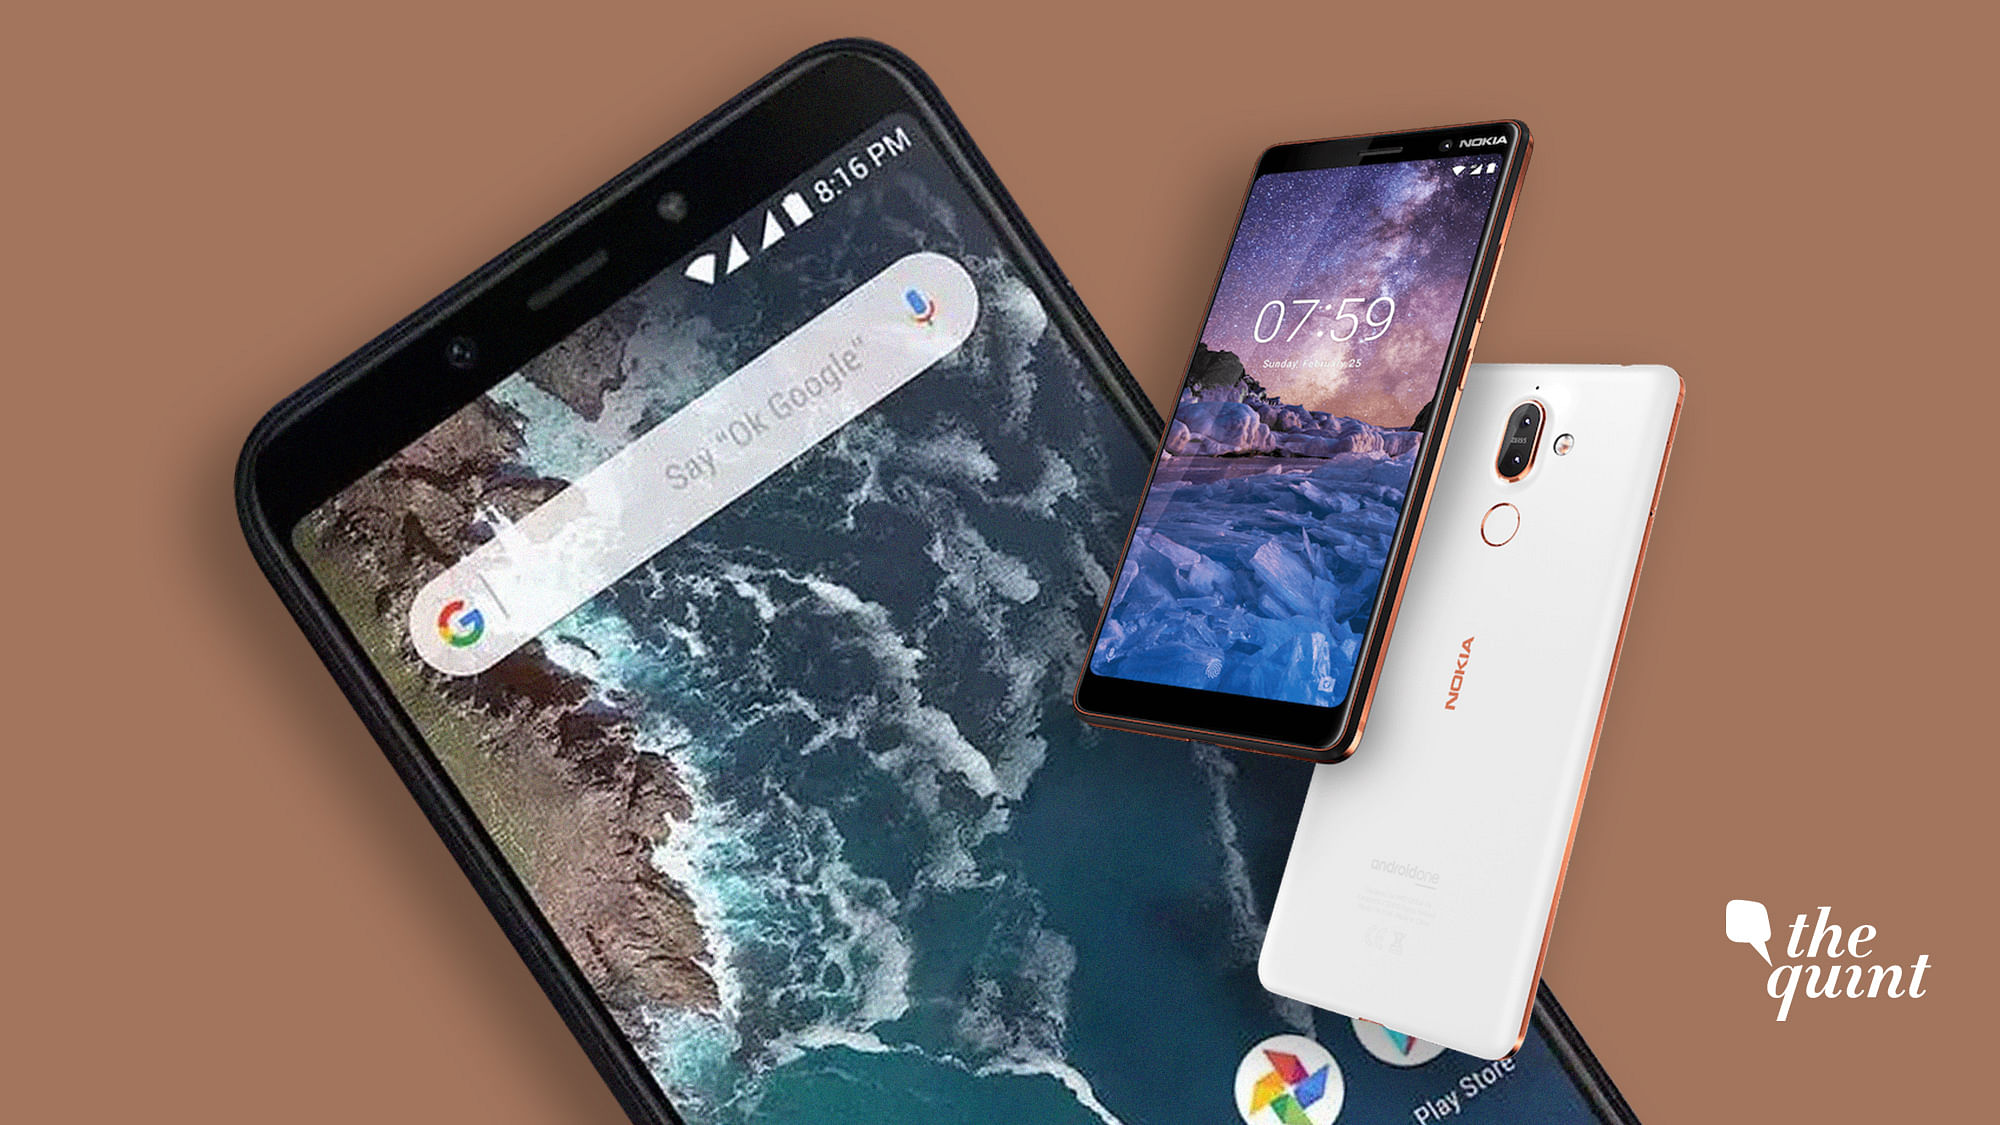 The Mi A2 will take the fight to the Nokia 7 Plus in the mid-range Android One powered phones.